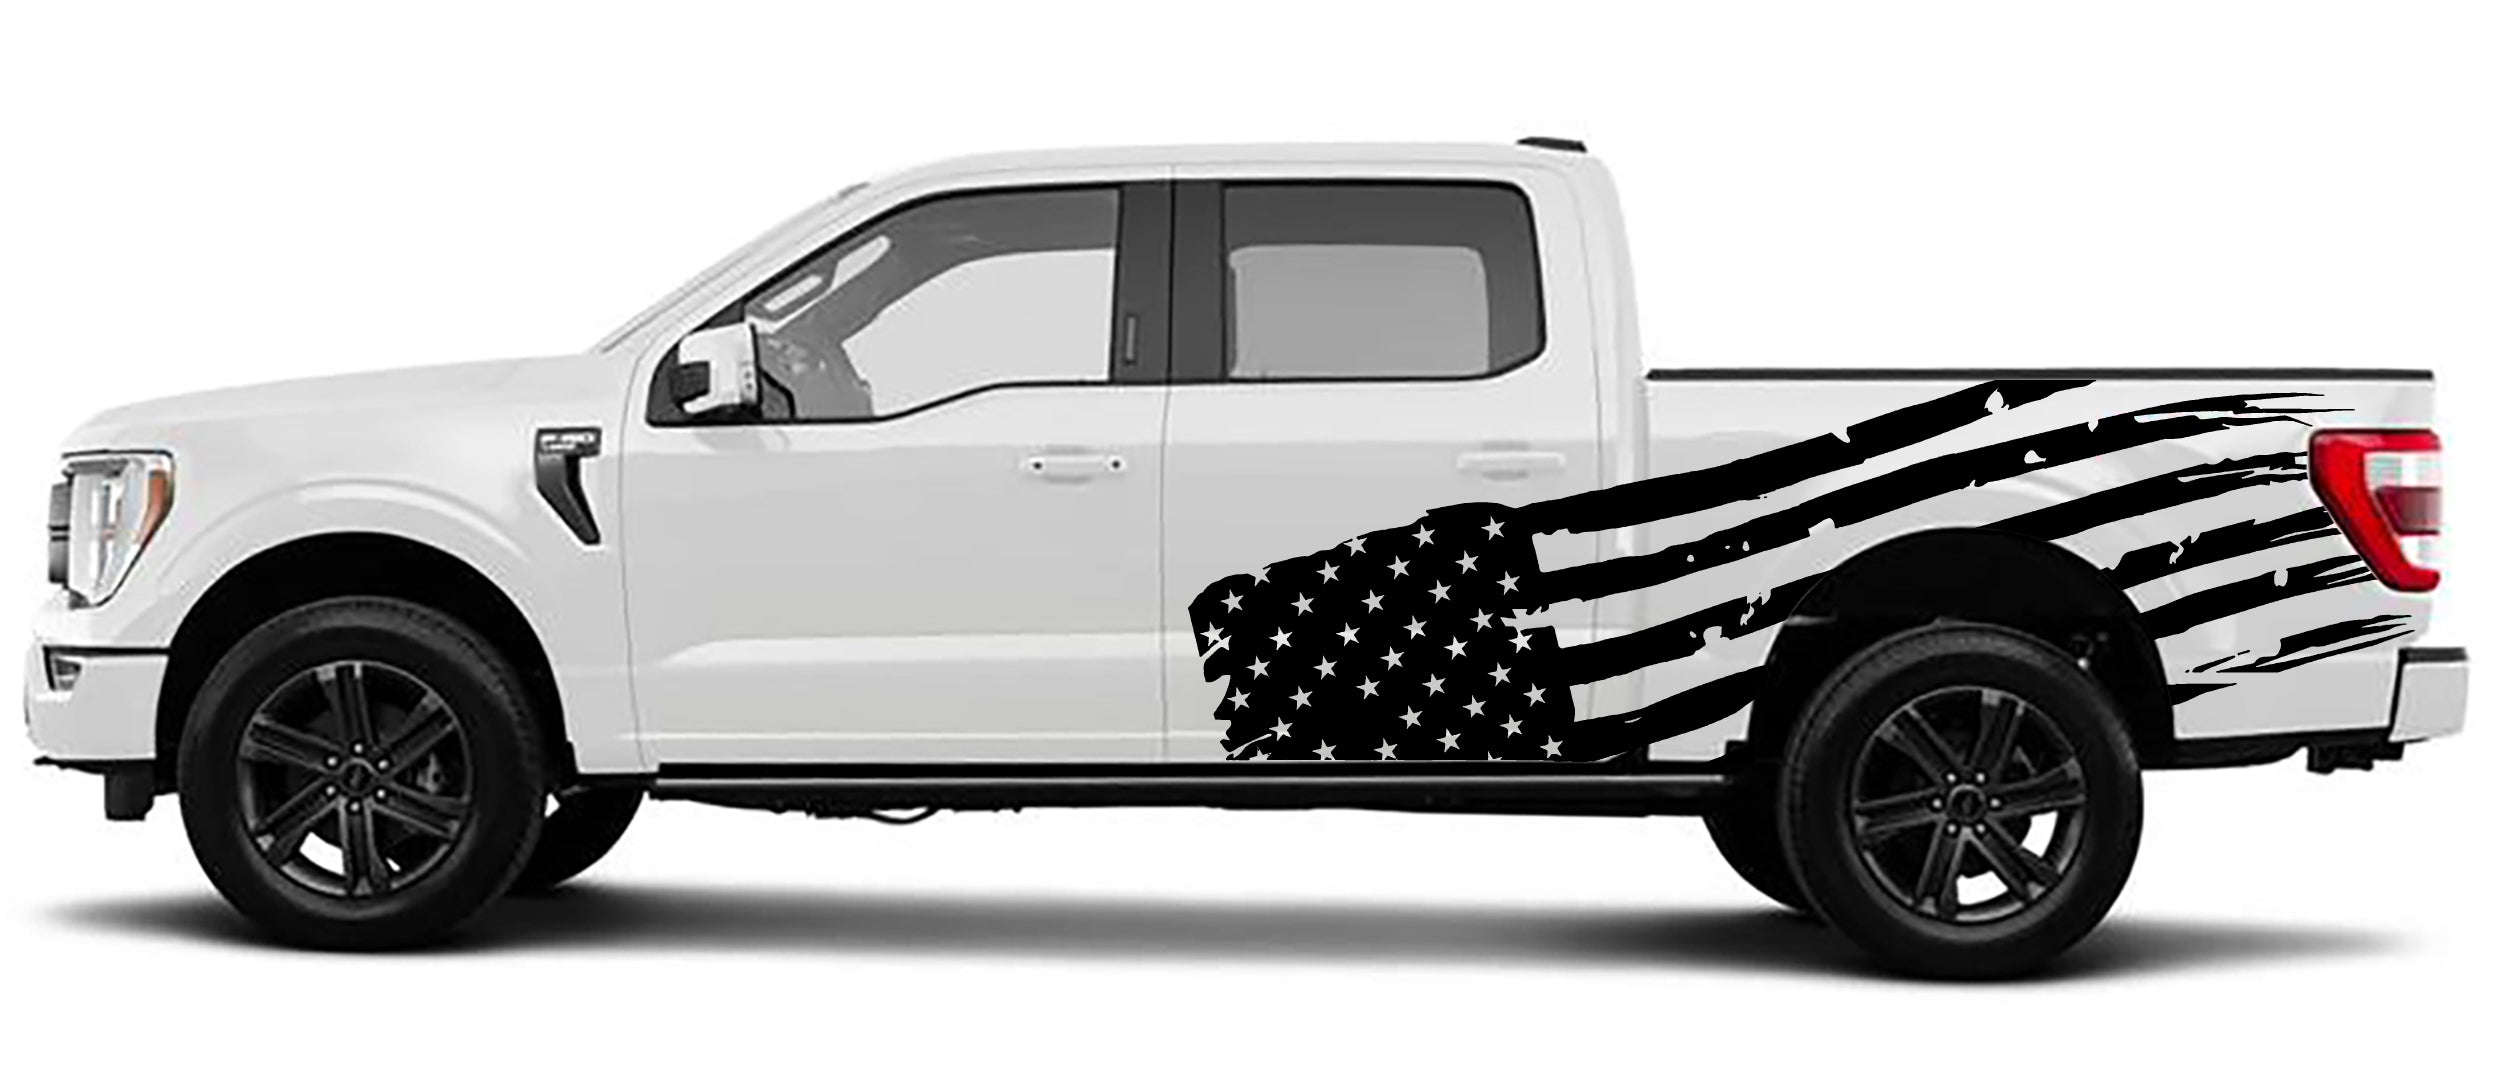 Ford F-150 US Flag Side Decals (Pair) : Vinyl Graphics Kit Fits (2021-2023)